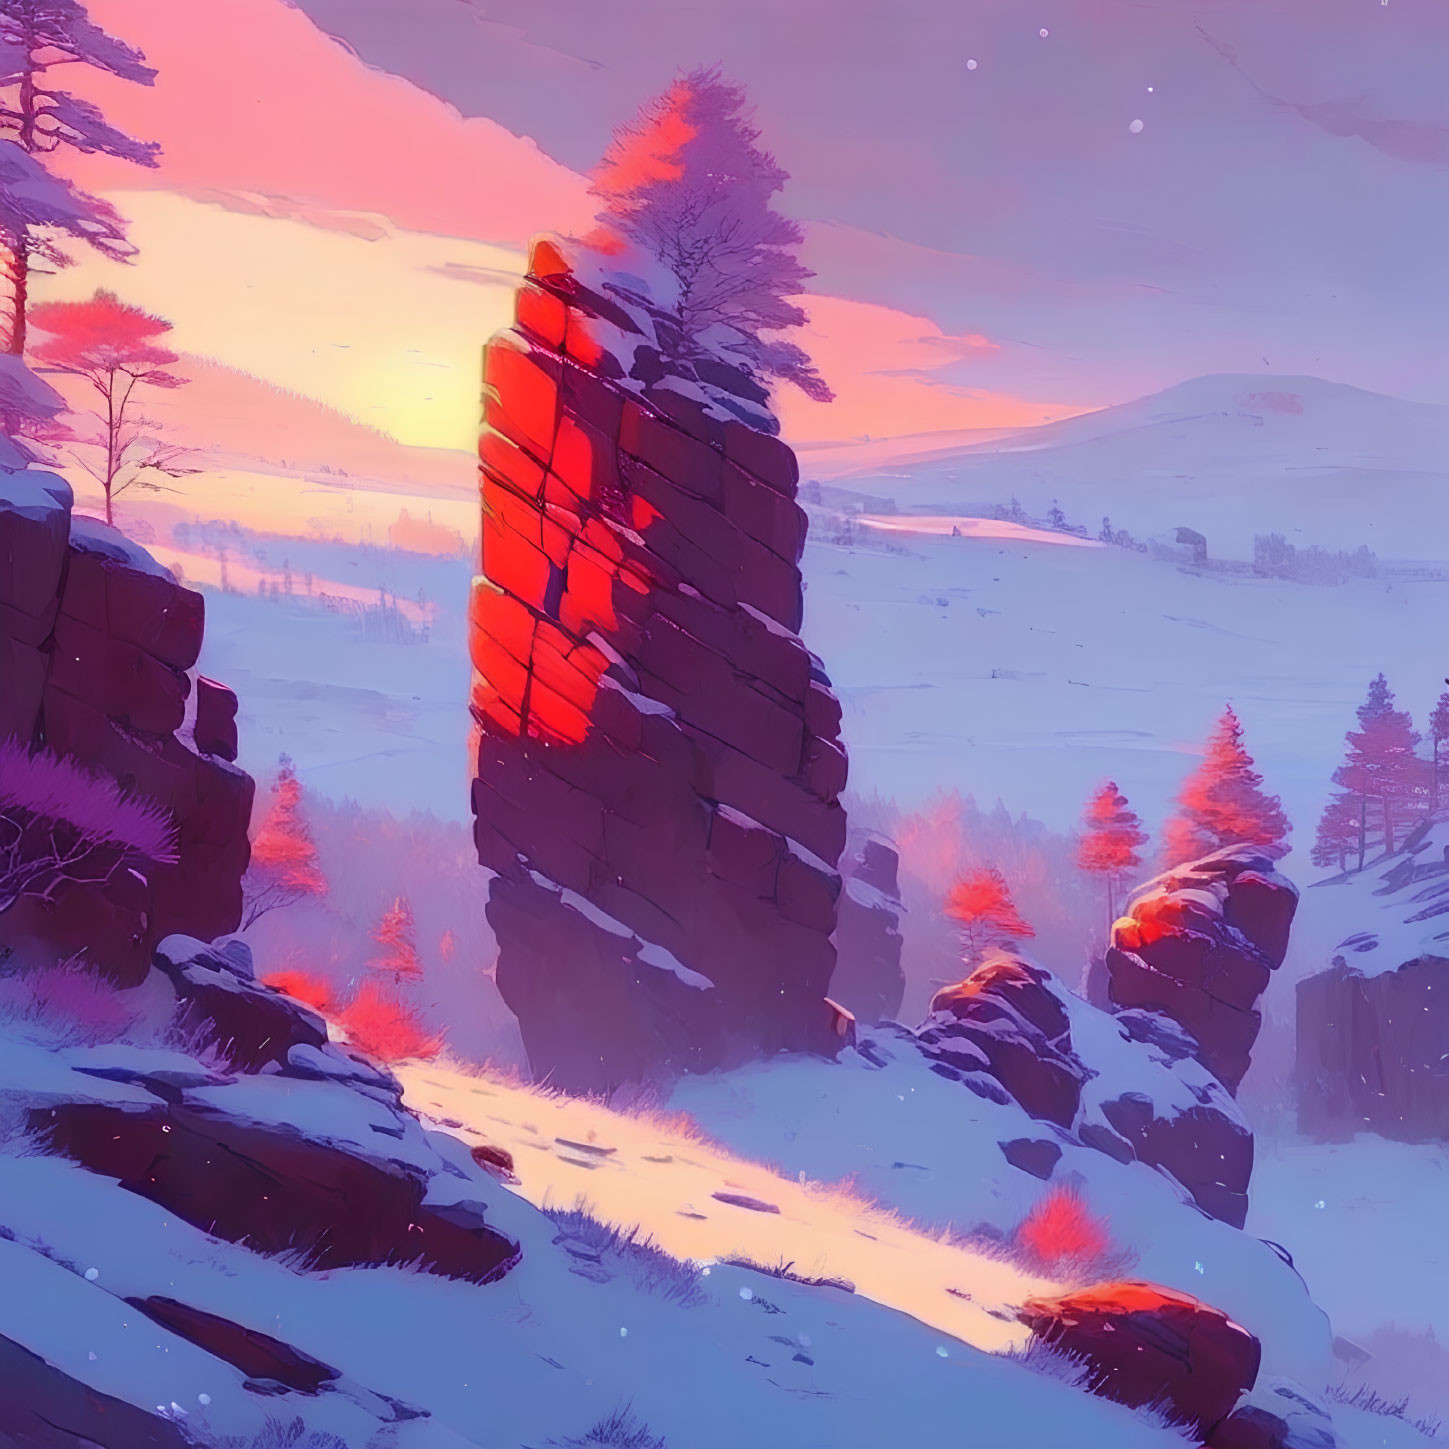 Snowy Winter Sunset Landscape with Glowing Rock Formation